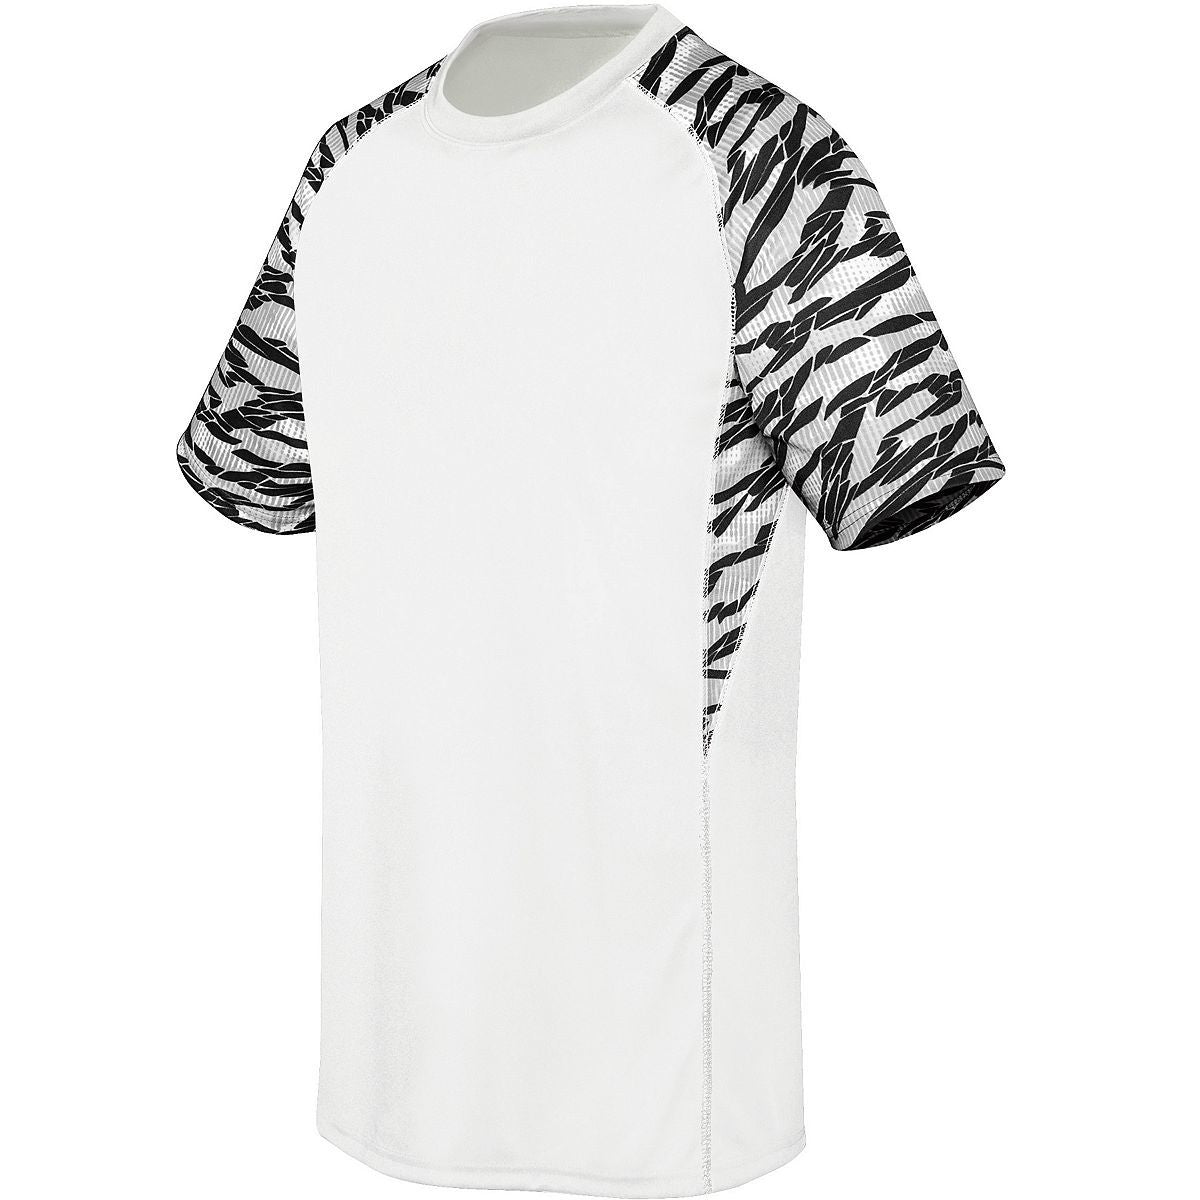 High 5 Youth Evolution Printed Short Sleeve Jersey in White/Fragment Print/White  -Part of the Youth, Youth-Jersey, High5-Products, Shirts product lines at KanaleyCreations.com